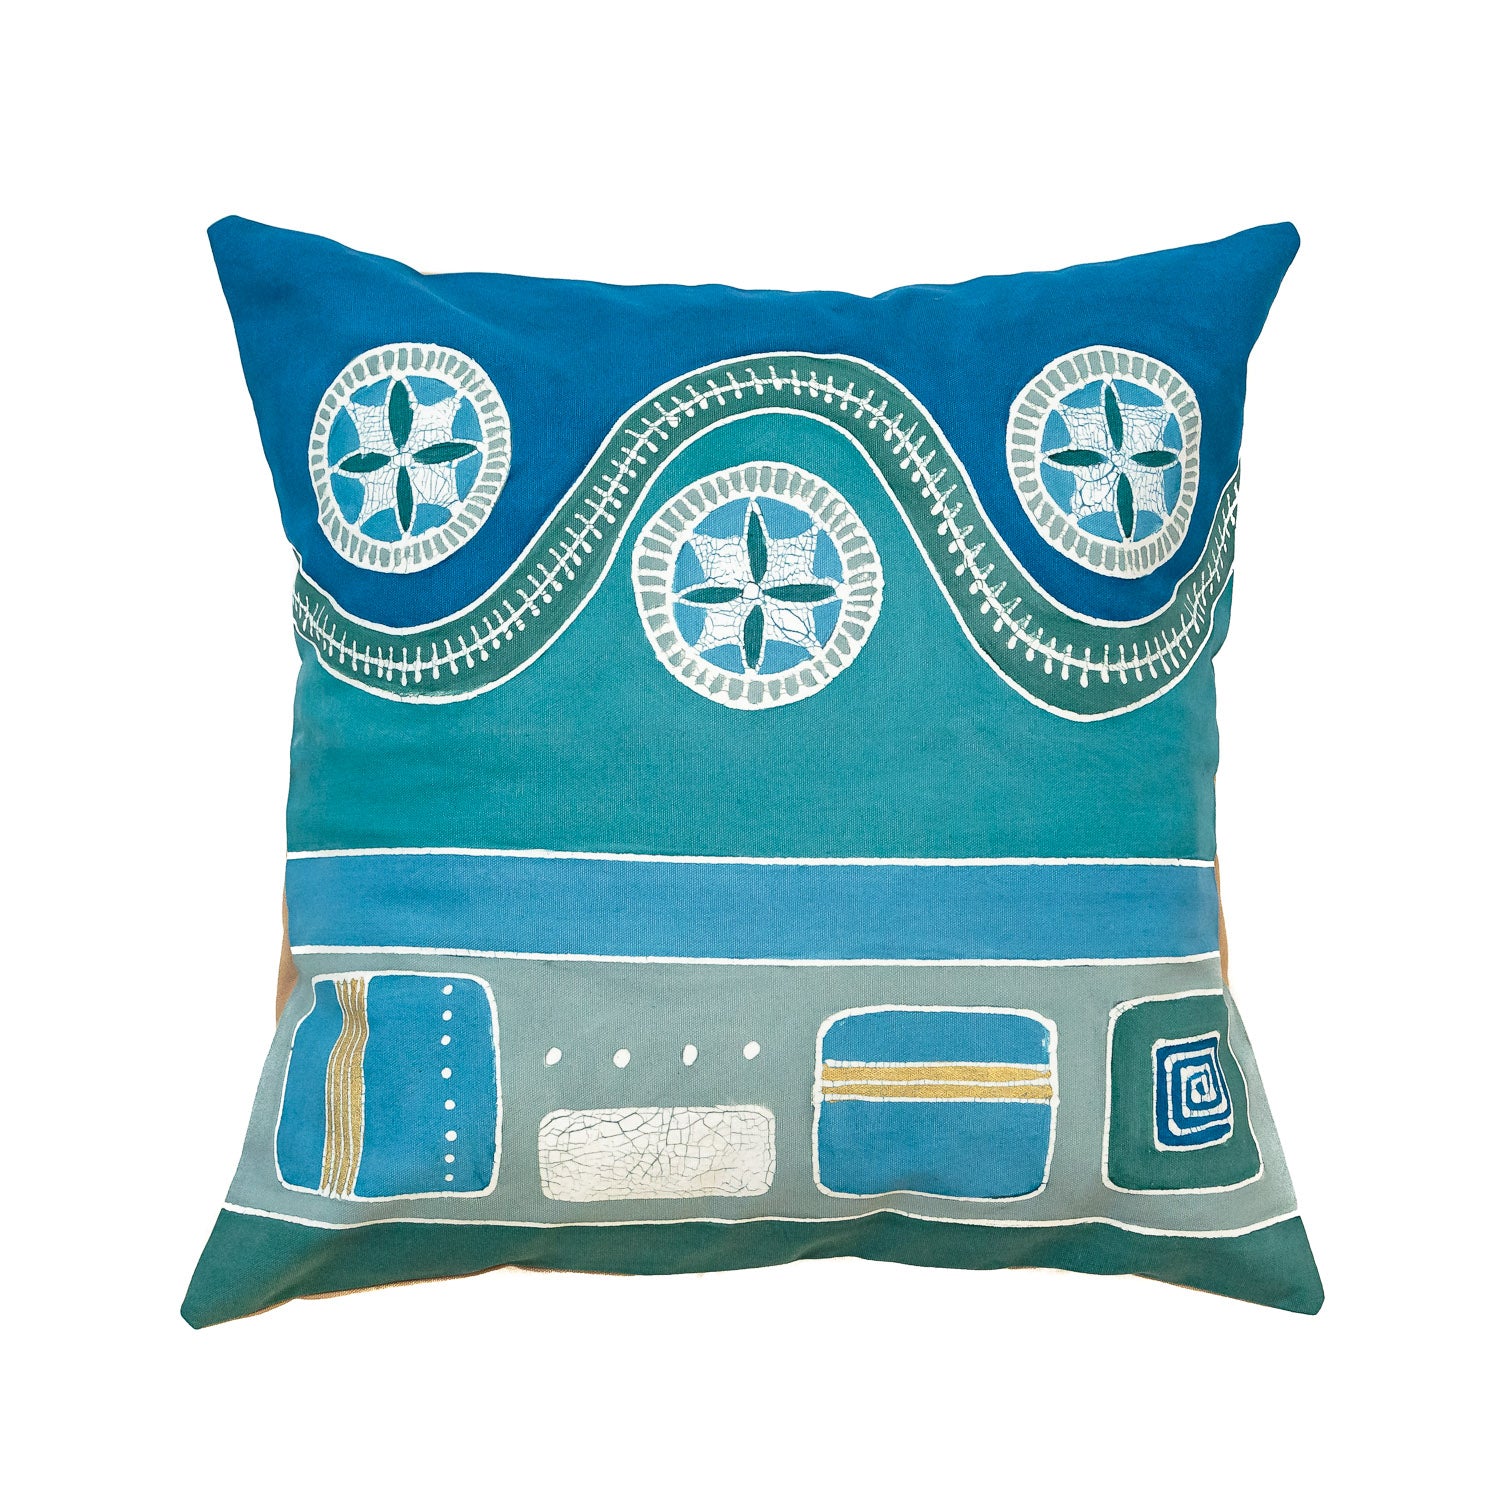 Mali Aqua Hills Cushion Cover - Hand Painted by TRIBAL TEXTILES - Handcrafted Home Decor Interiors - African Made